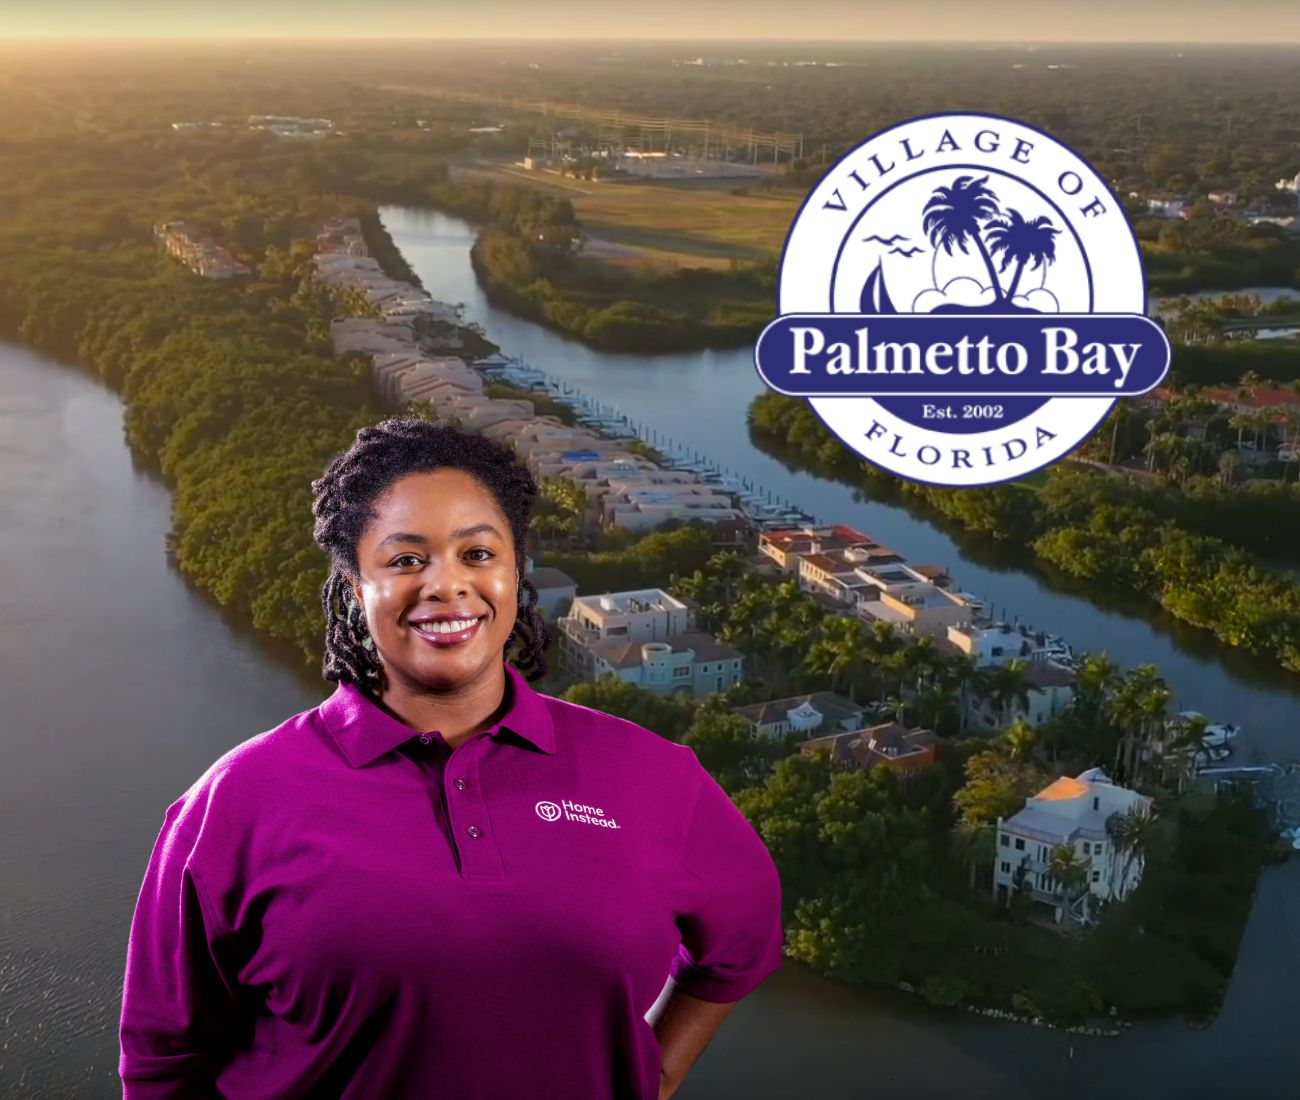 Home Instead caregiver with Palmetto Bay, Florida in the background